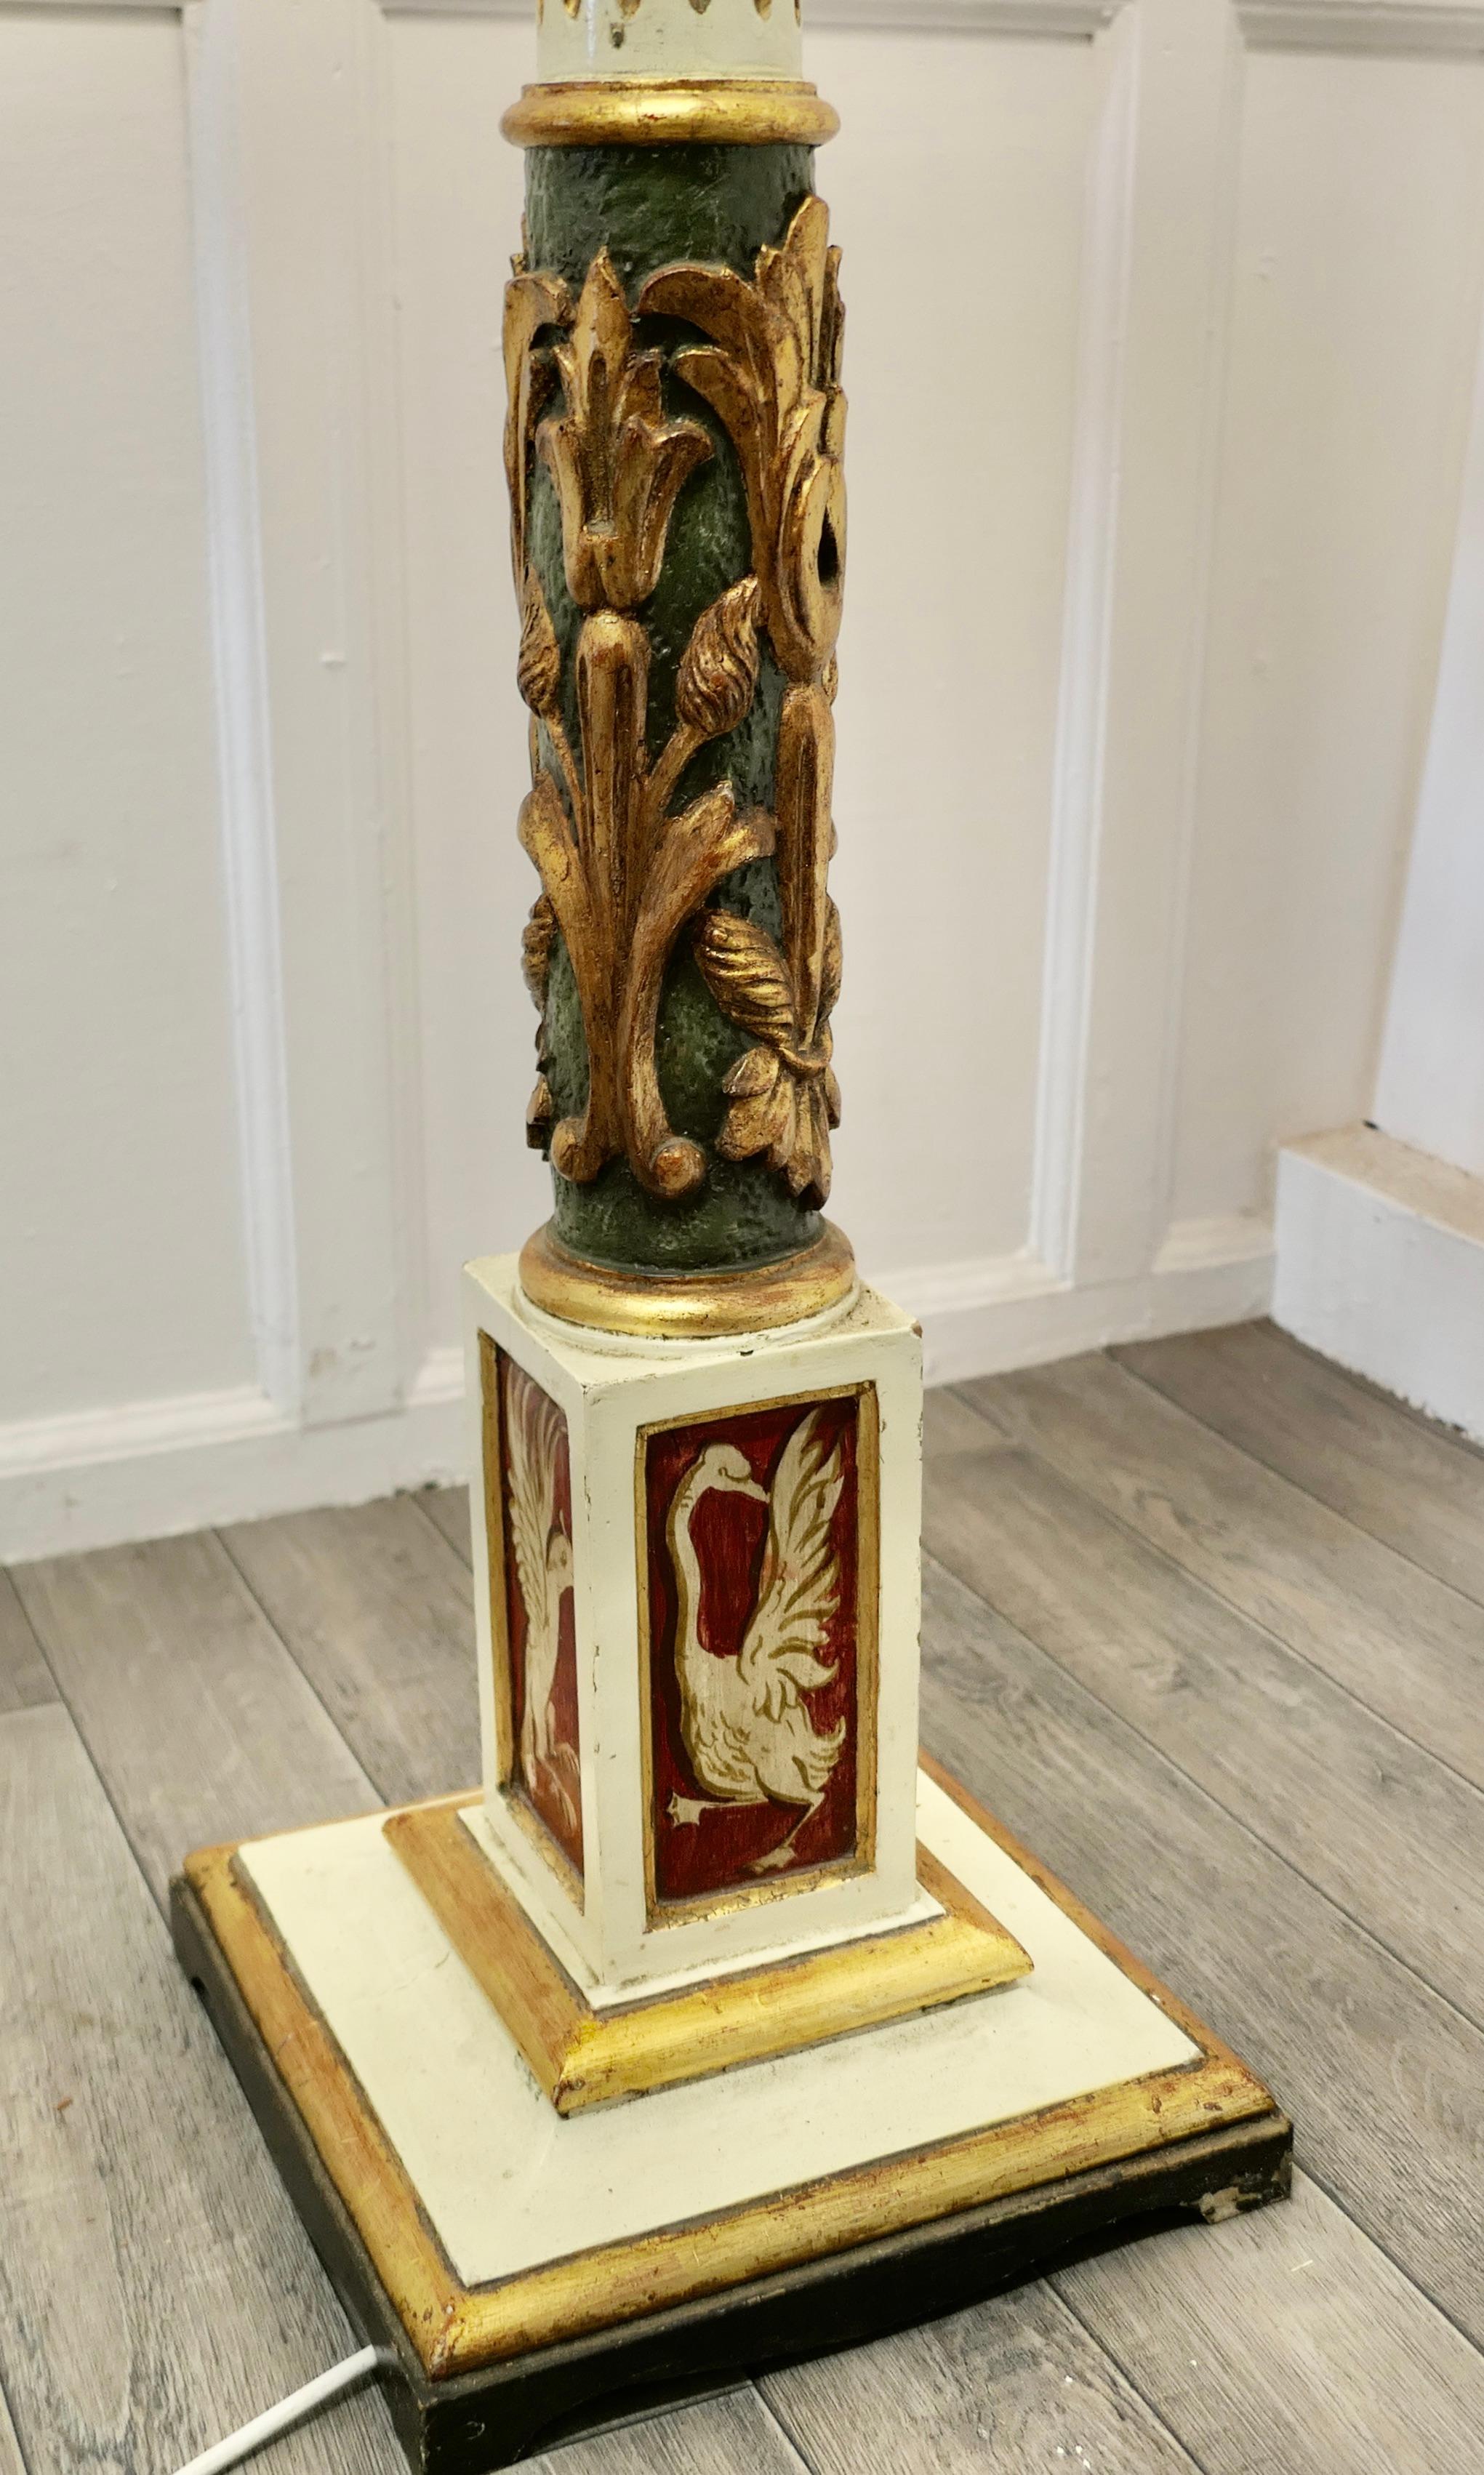 Spanish Folk Art Floor Standing Standard Lamp In Good Condition For Sale In Chillerton, Isle of Wight